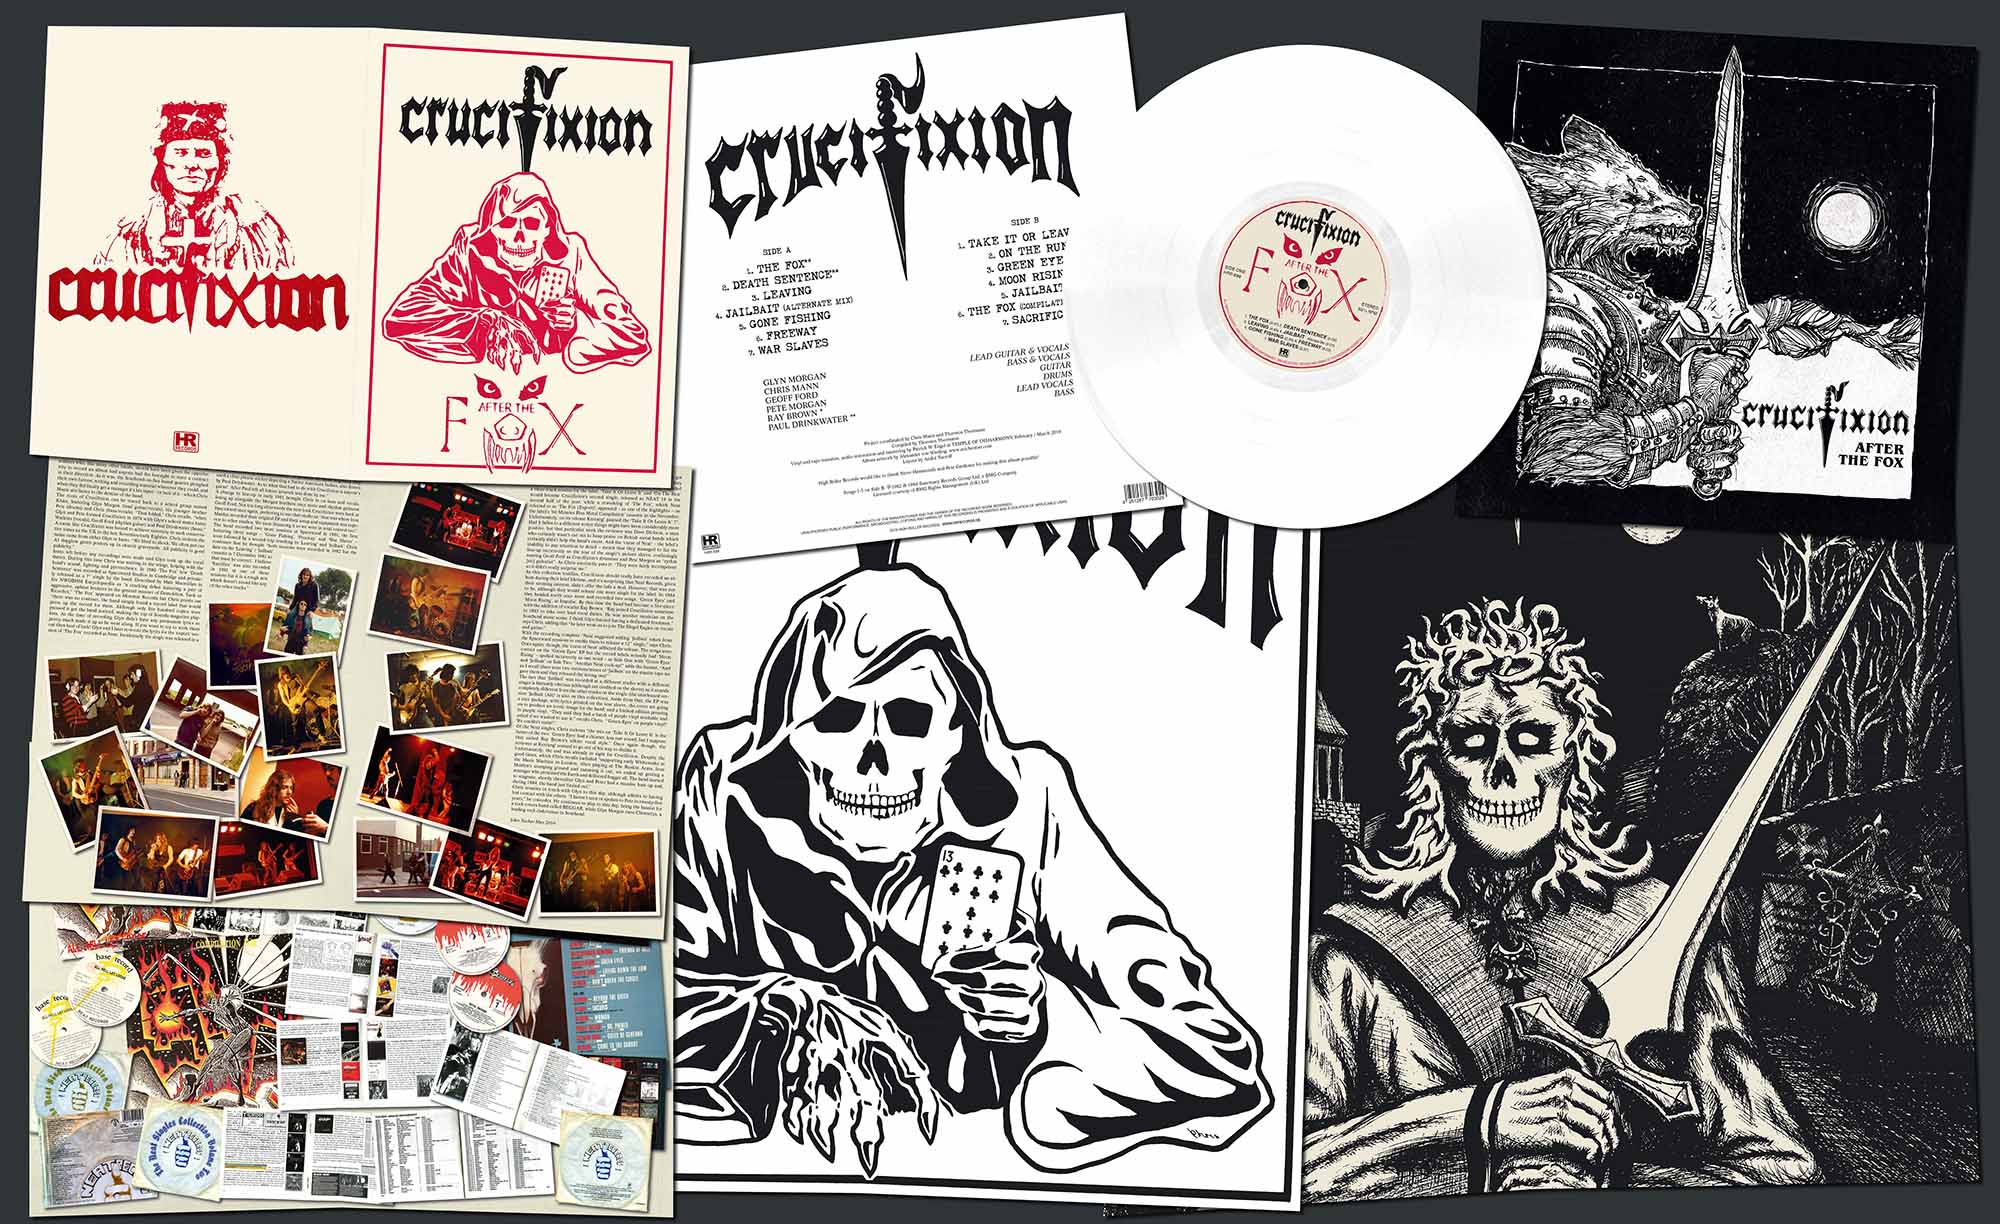 CRUCIFIXION - After the Fox  LP